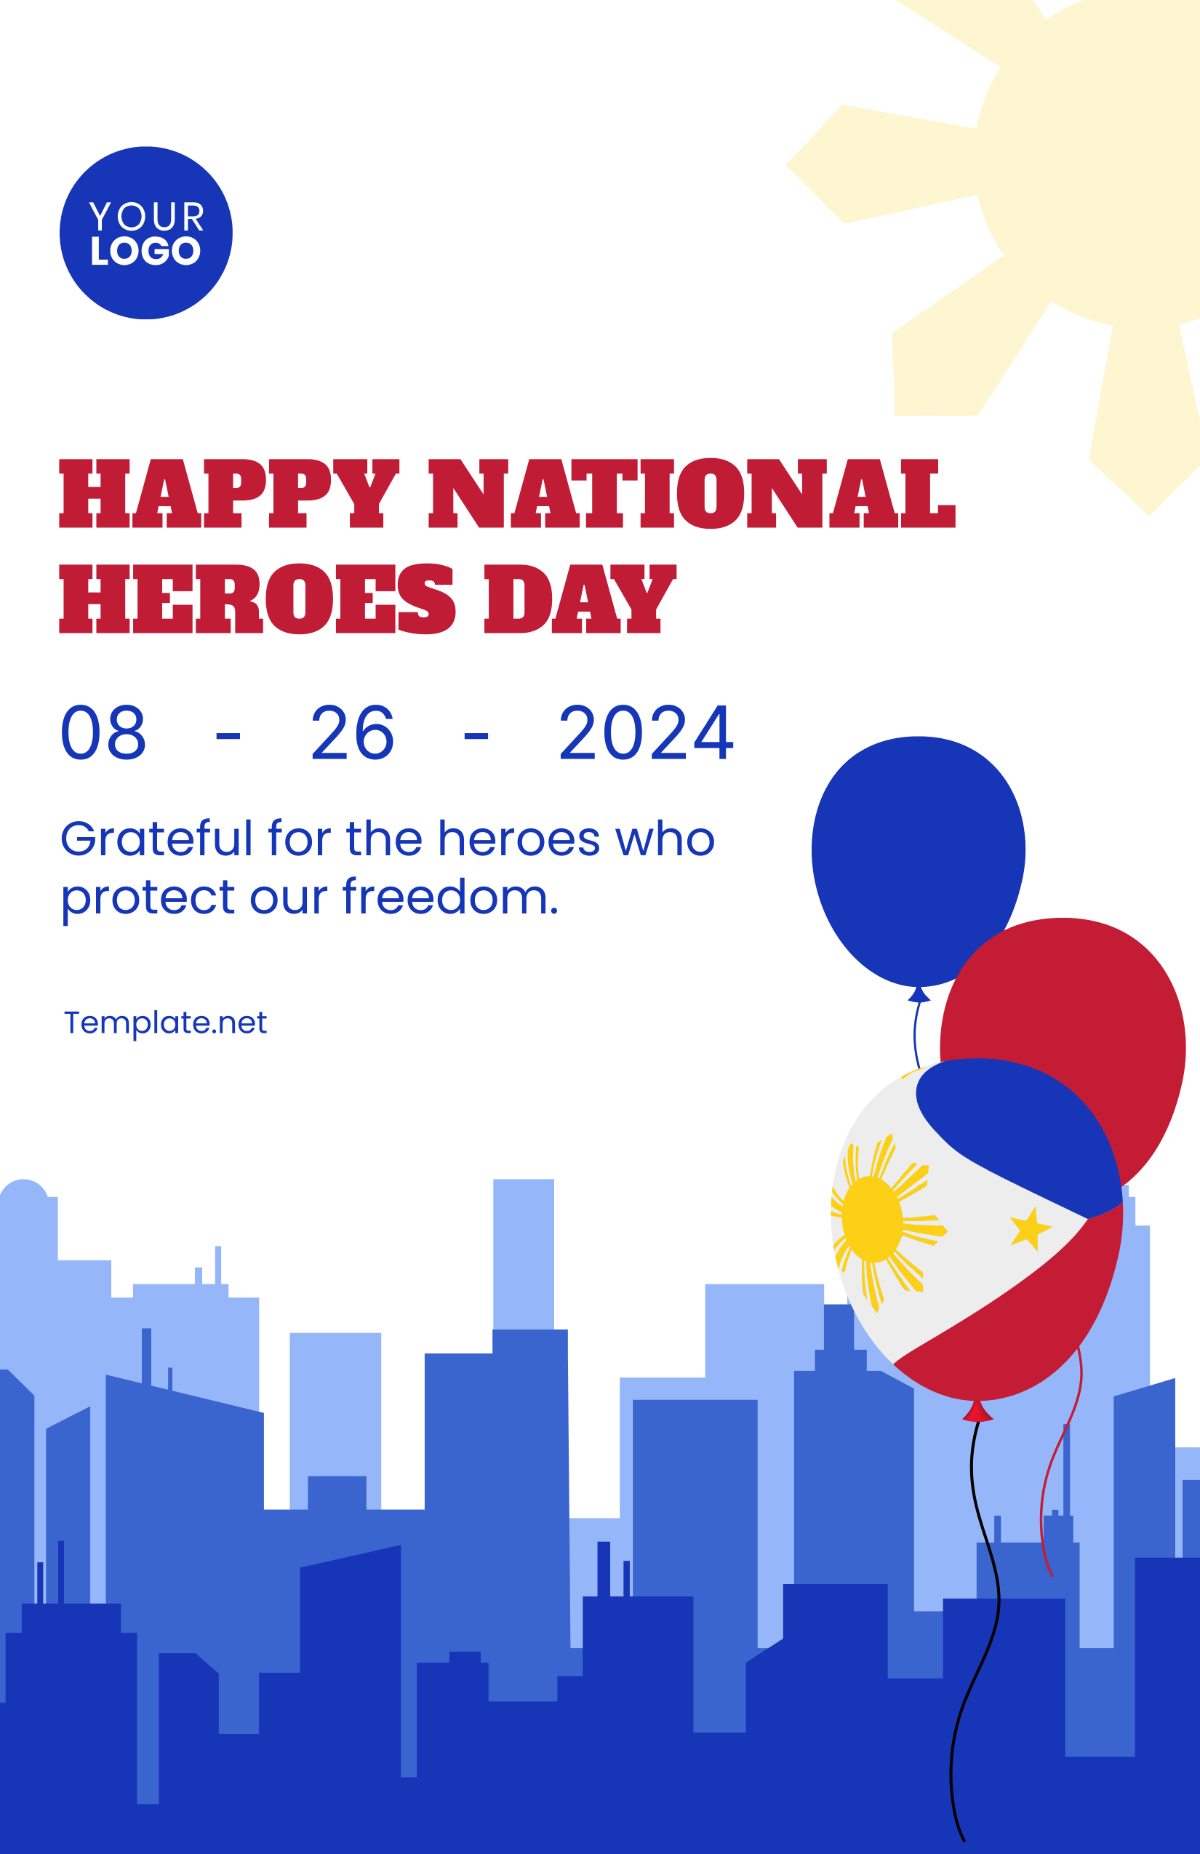 Happy National Heroes Day Poster